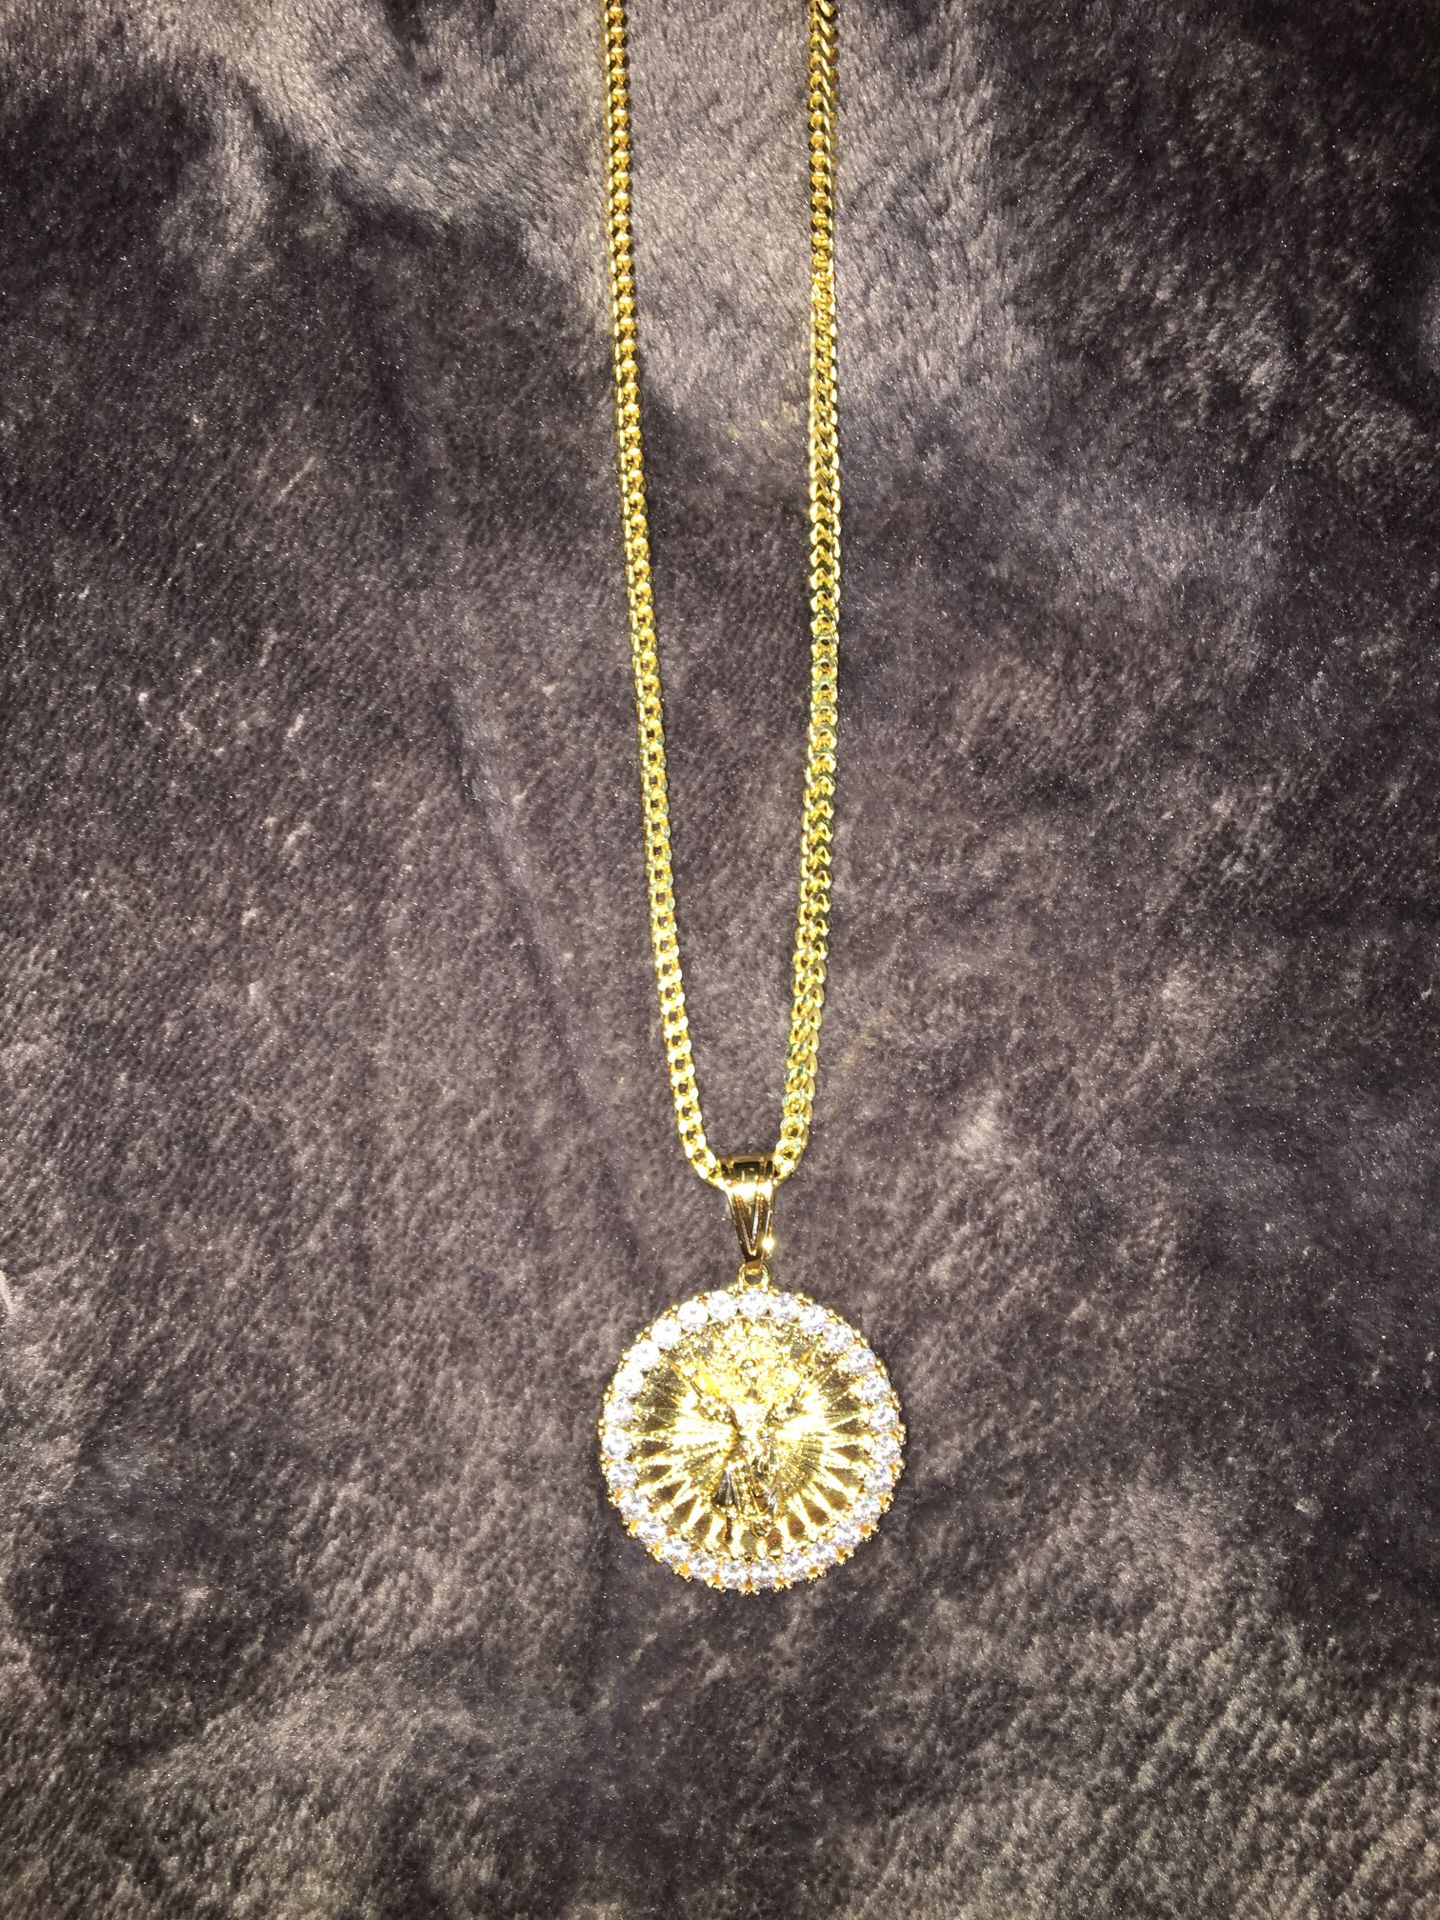 GOLD AND DIAMOND PENDANT AND CHAIN (SEPARATE)